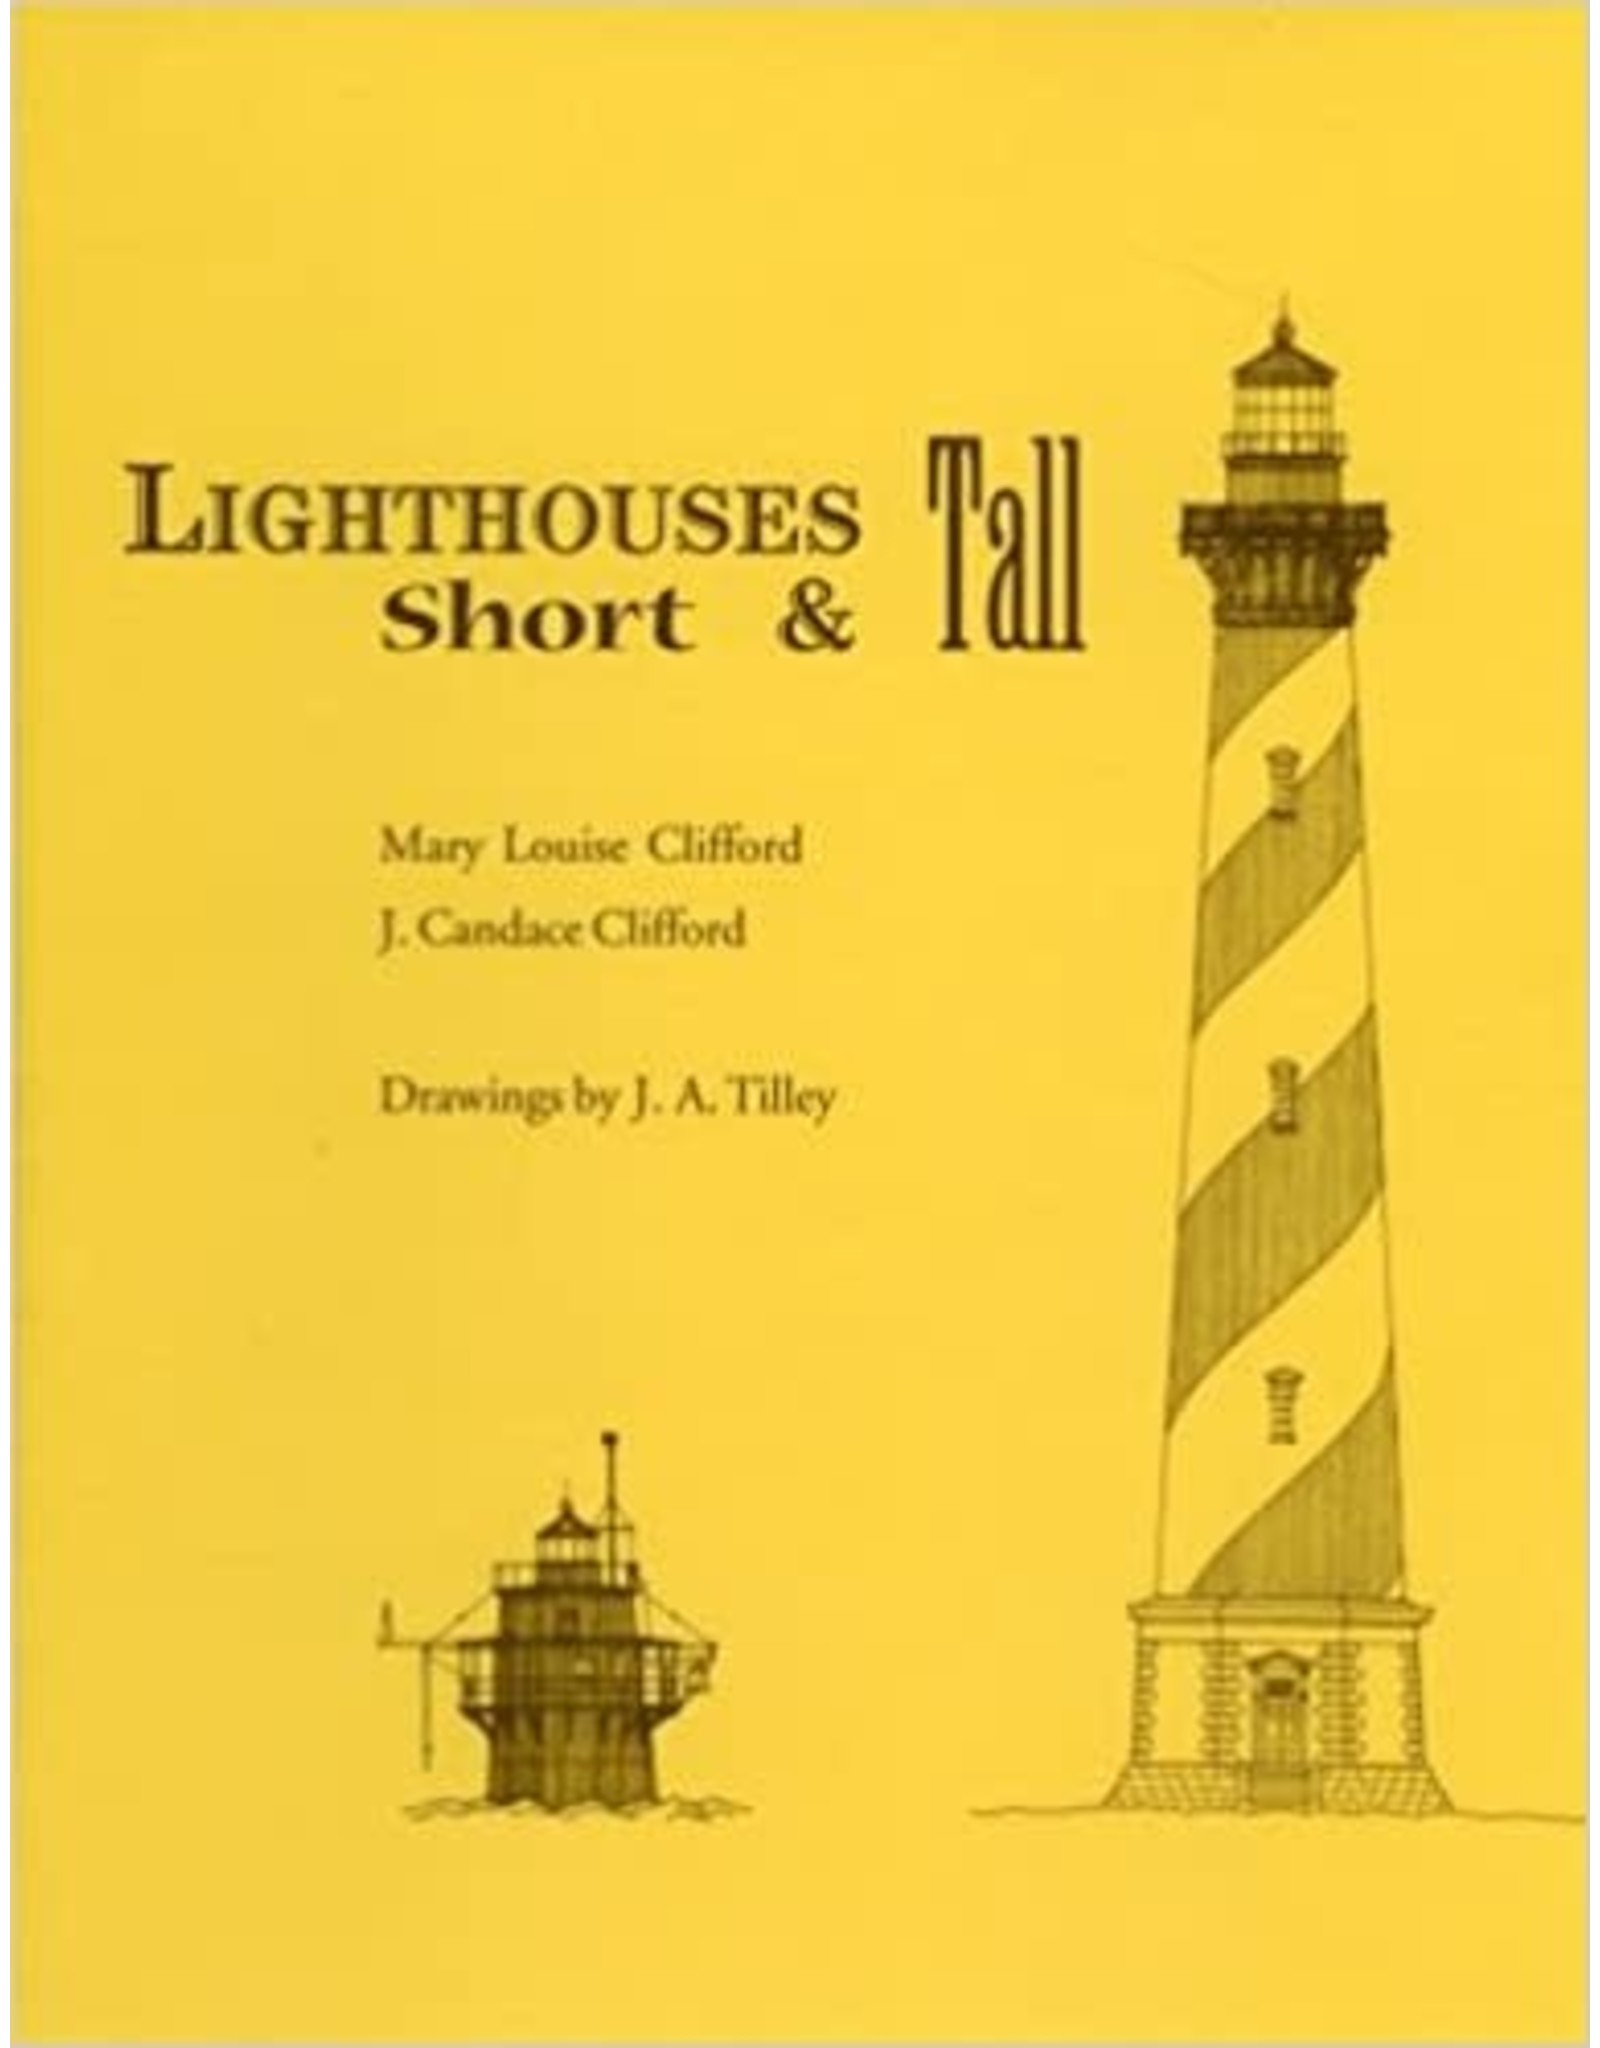 Lighthouses Short & Tall, Clifford